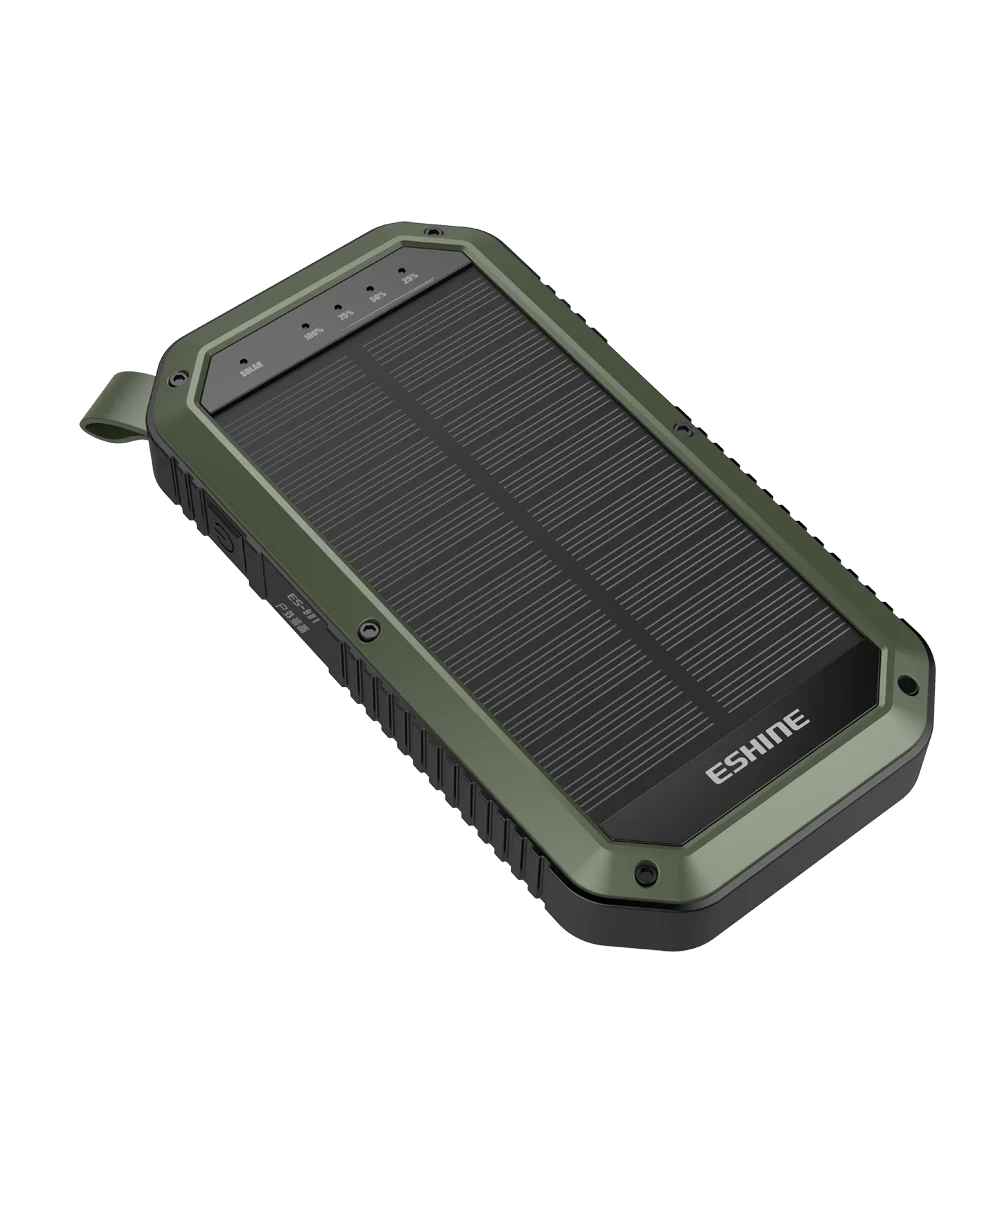 

2018 NEW Waterproof IP68 Solar Cellphone charger 8000mah Portable Solar Power Bank with Dual USB